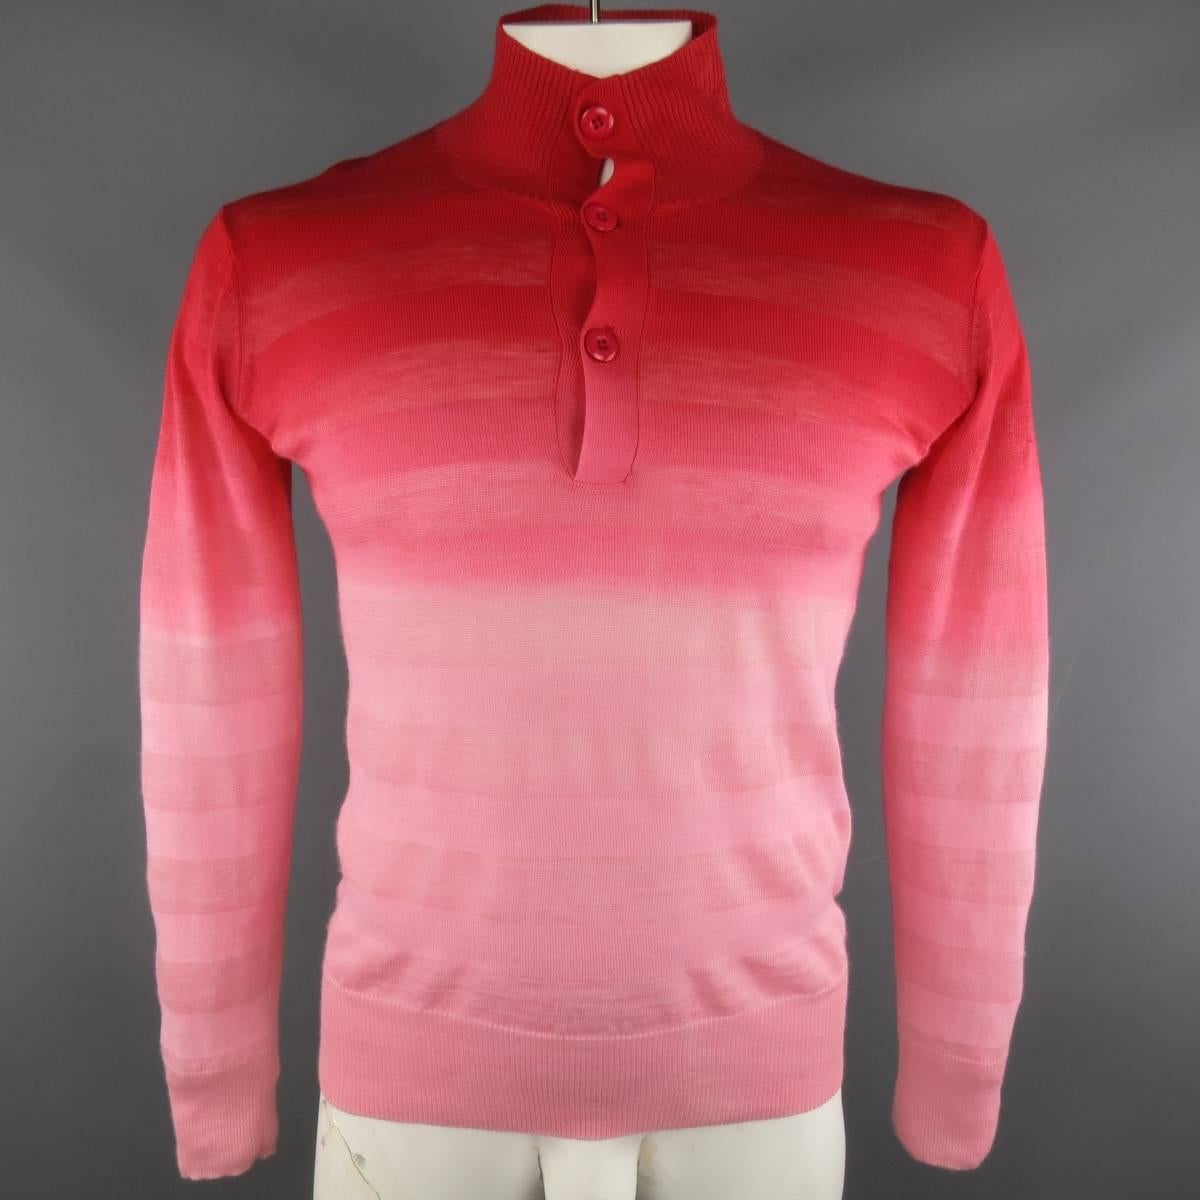 Y's by YOHJI YAMAMOTO Pullover consists of cotton material in a red color tone. Designed with a high collar, 3-button front, rib cuffs and hem. Detailed in a ombre color pattern in red and light pink. Made in Japan.
 
Good Pre-Owned Condition